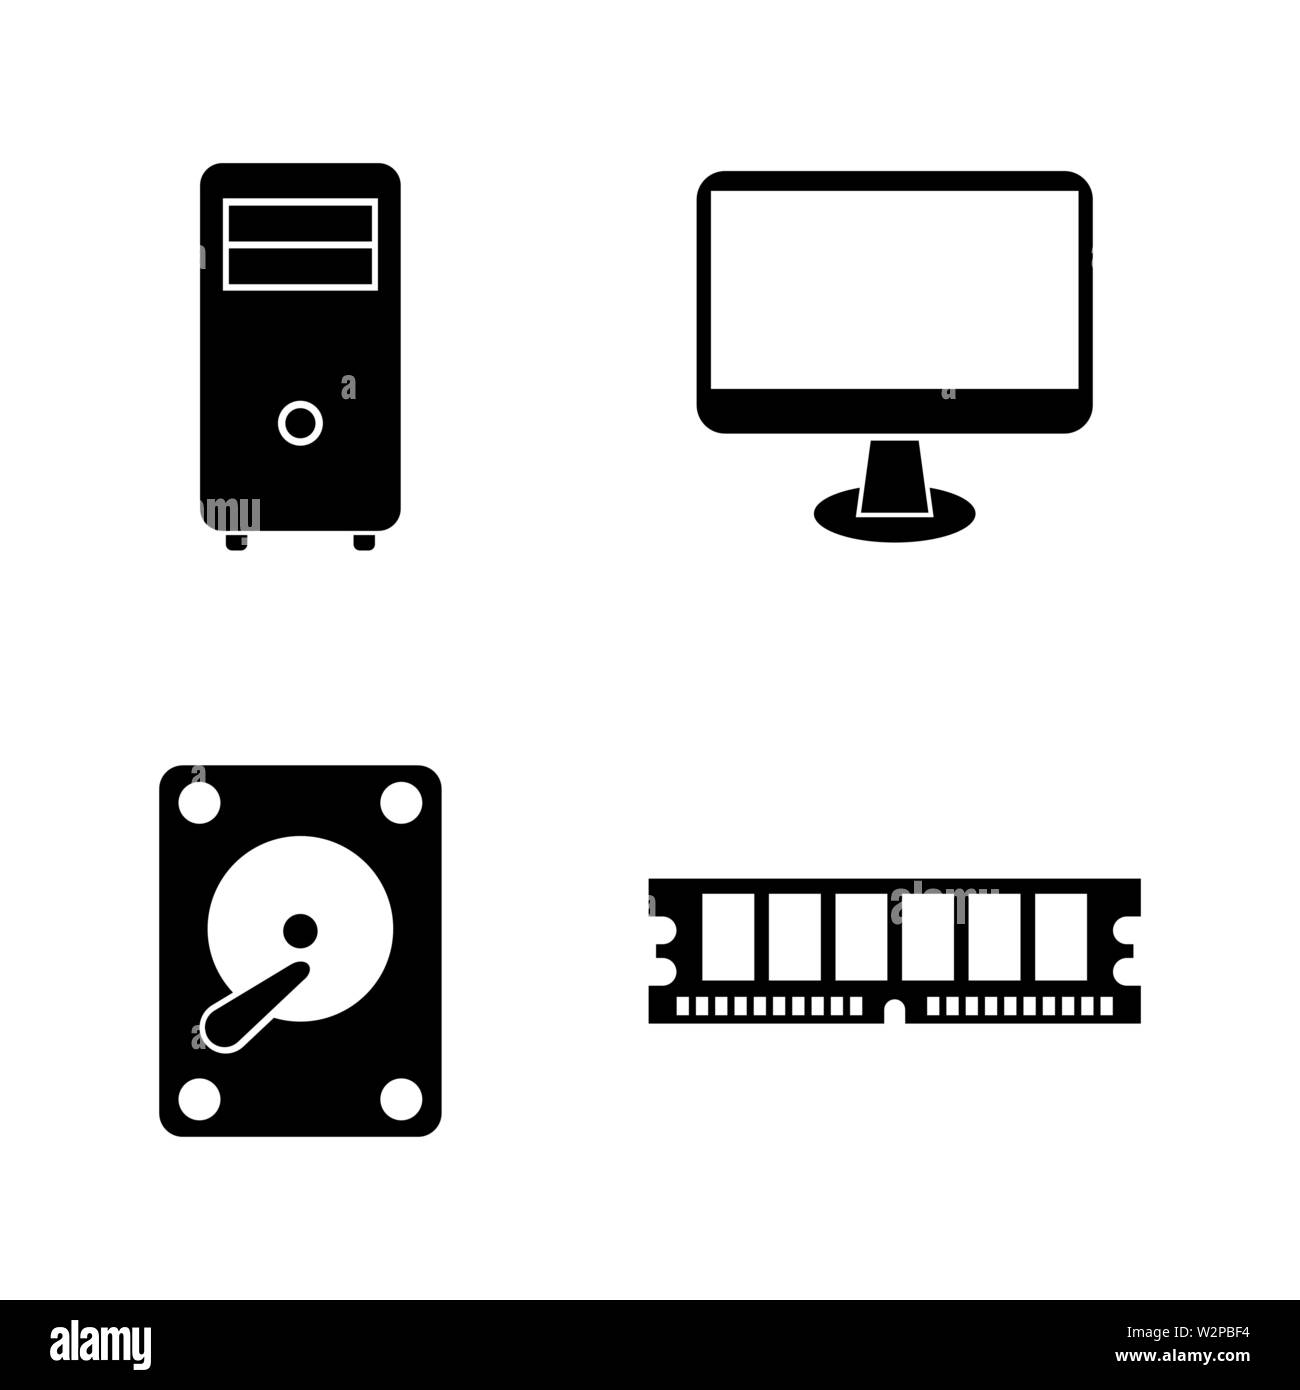 Computer Parts. Simple Related Vector Icons Set for Video, Mobile Apps, Web Sites, Print Projects and Your Design. Black Flat Illustration on White Ba Stock Vector